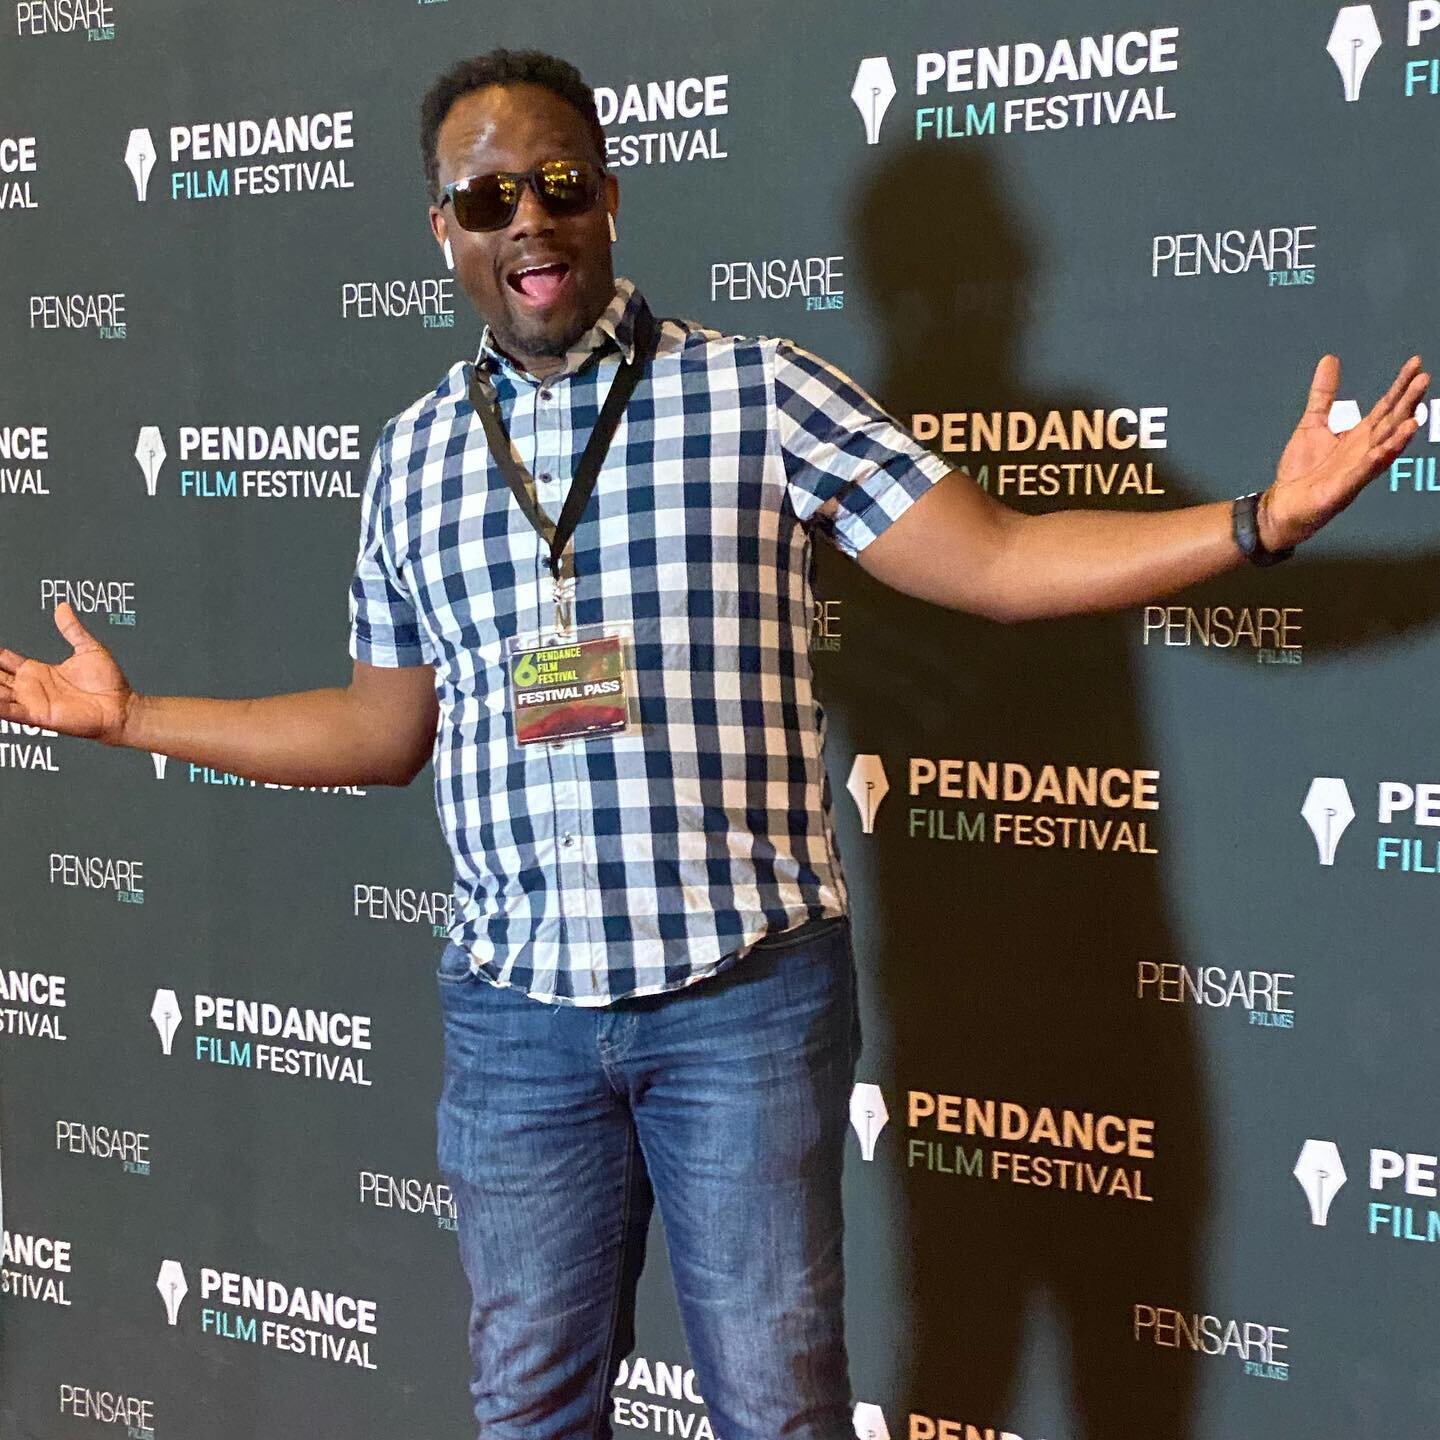 This past weekend, the @pendancefilmfestival screened high-quality short and feature-length films from around the world. Wonderful job by the organizers led by @pensare.films &mdash; and best of luck putting together the next one! #film #filmfestival